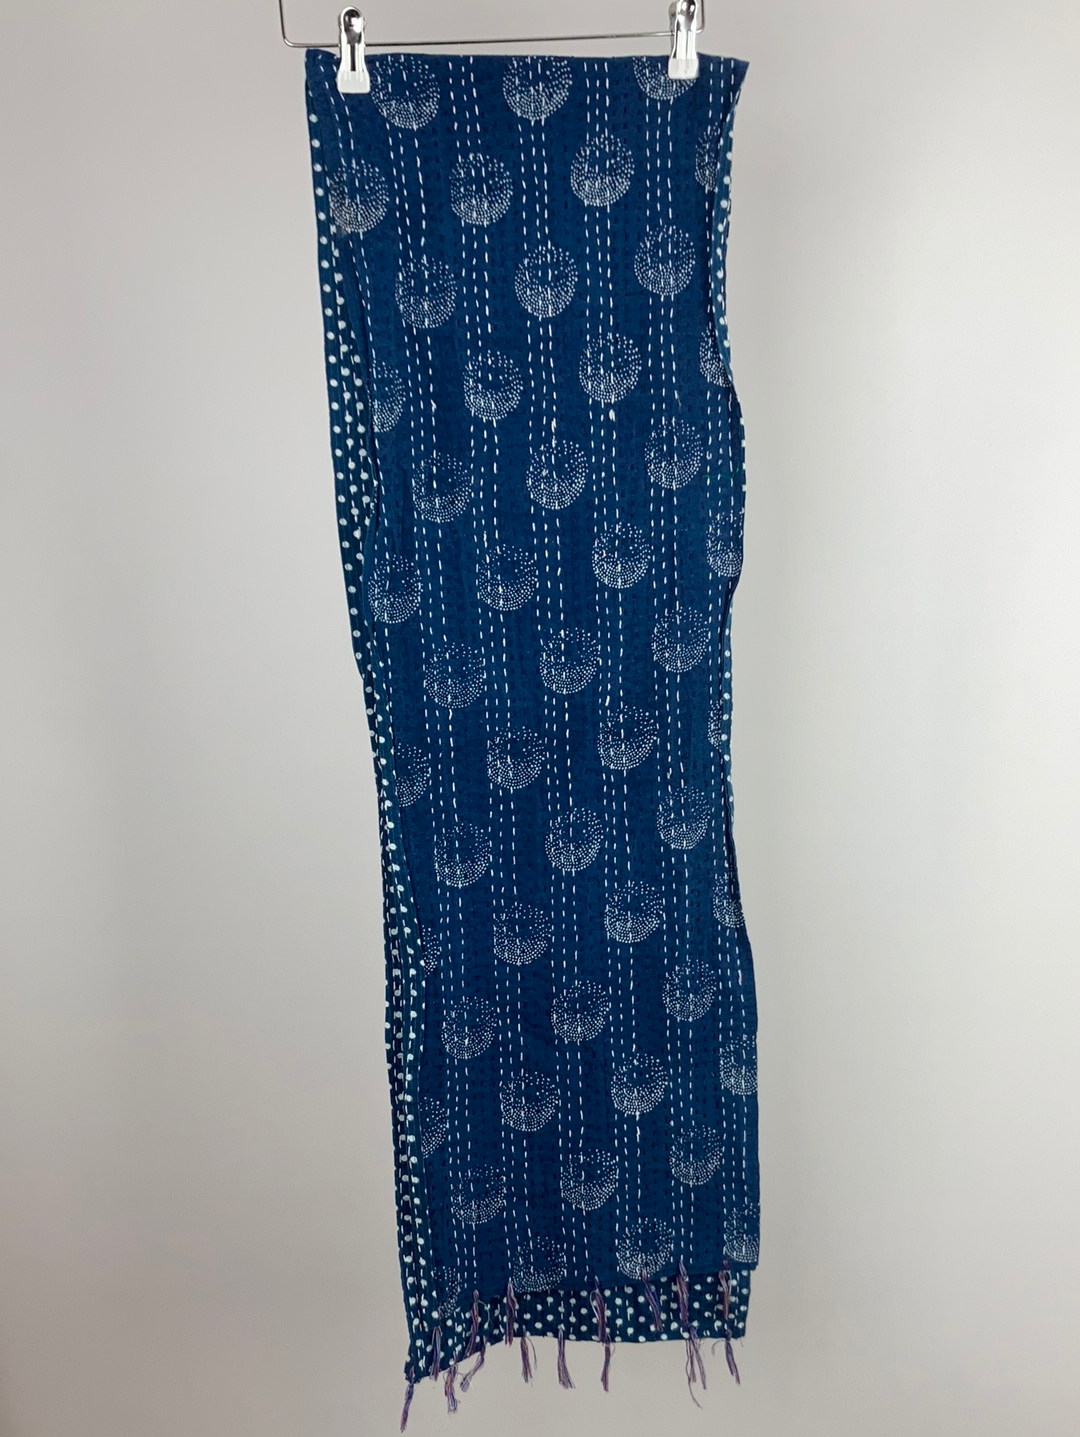 Indigo printed scarf with woven threads